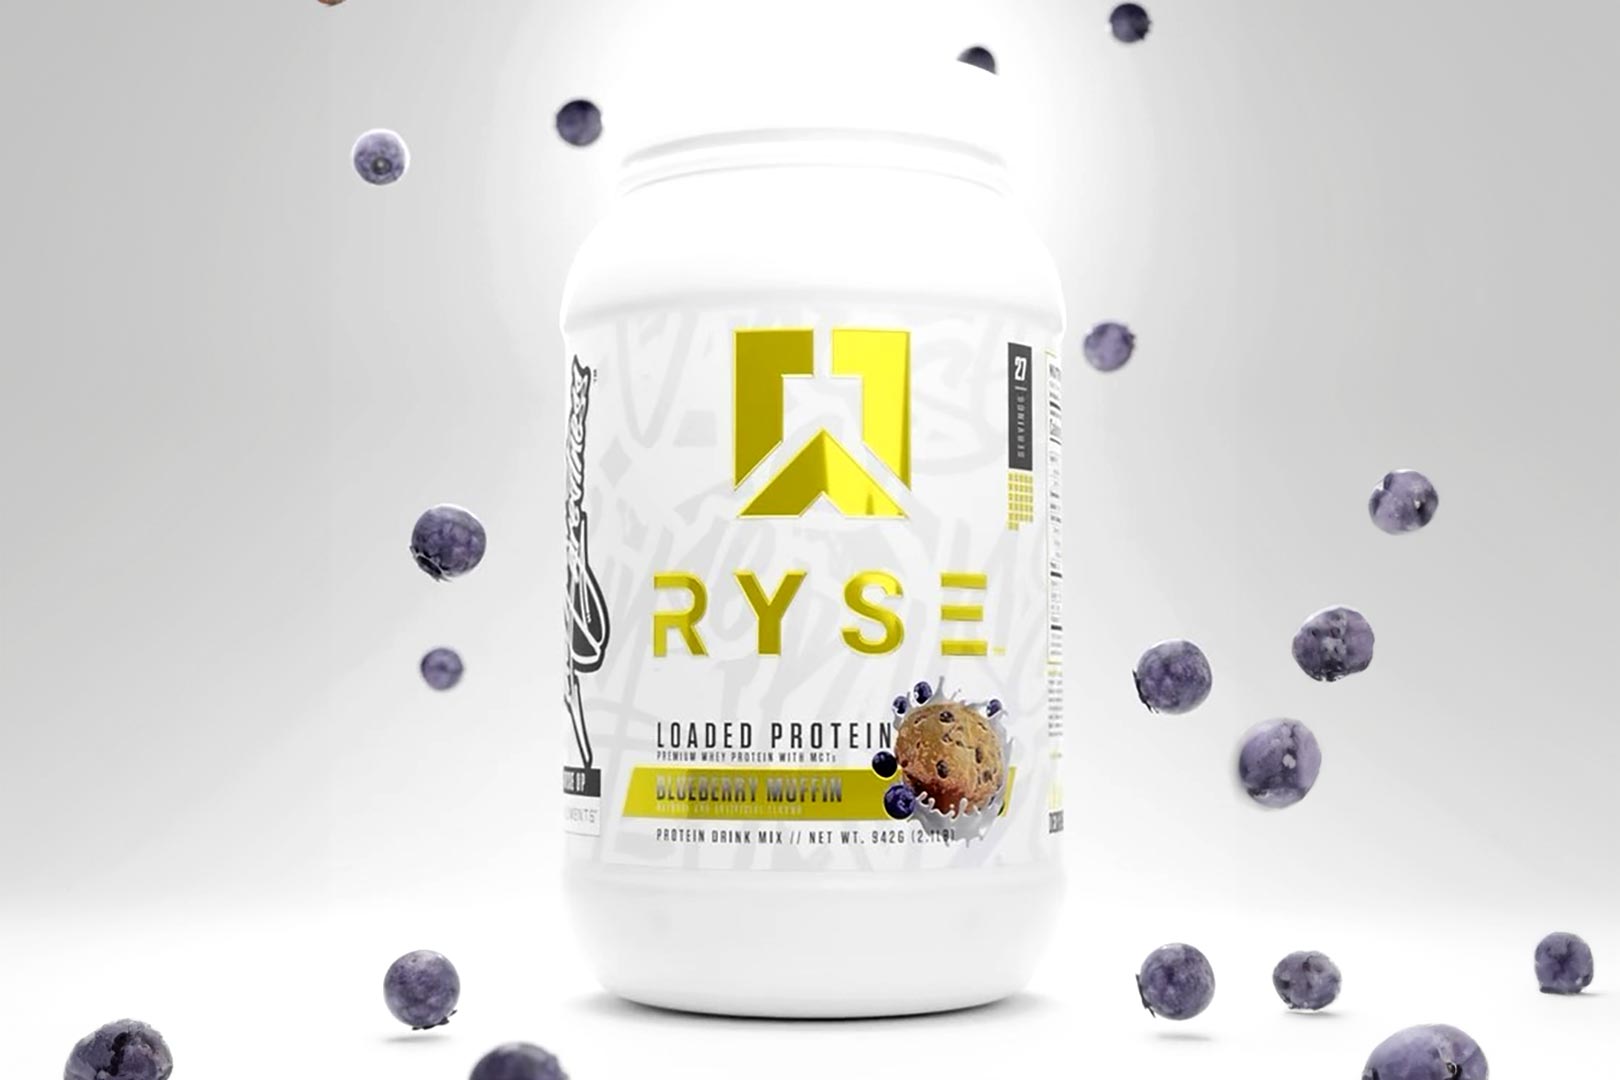 Ryse Blueberry Muffin Loaded Protein